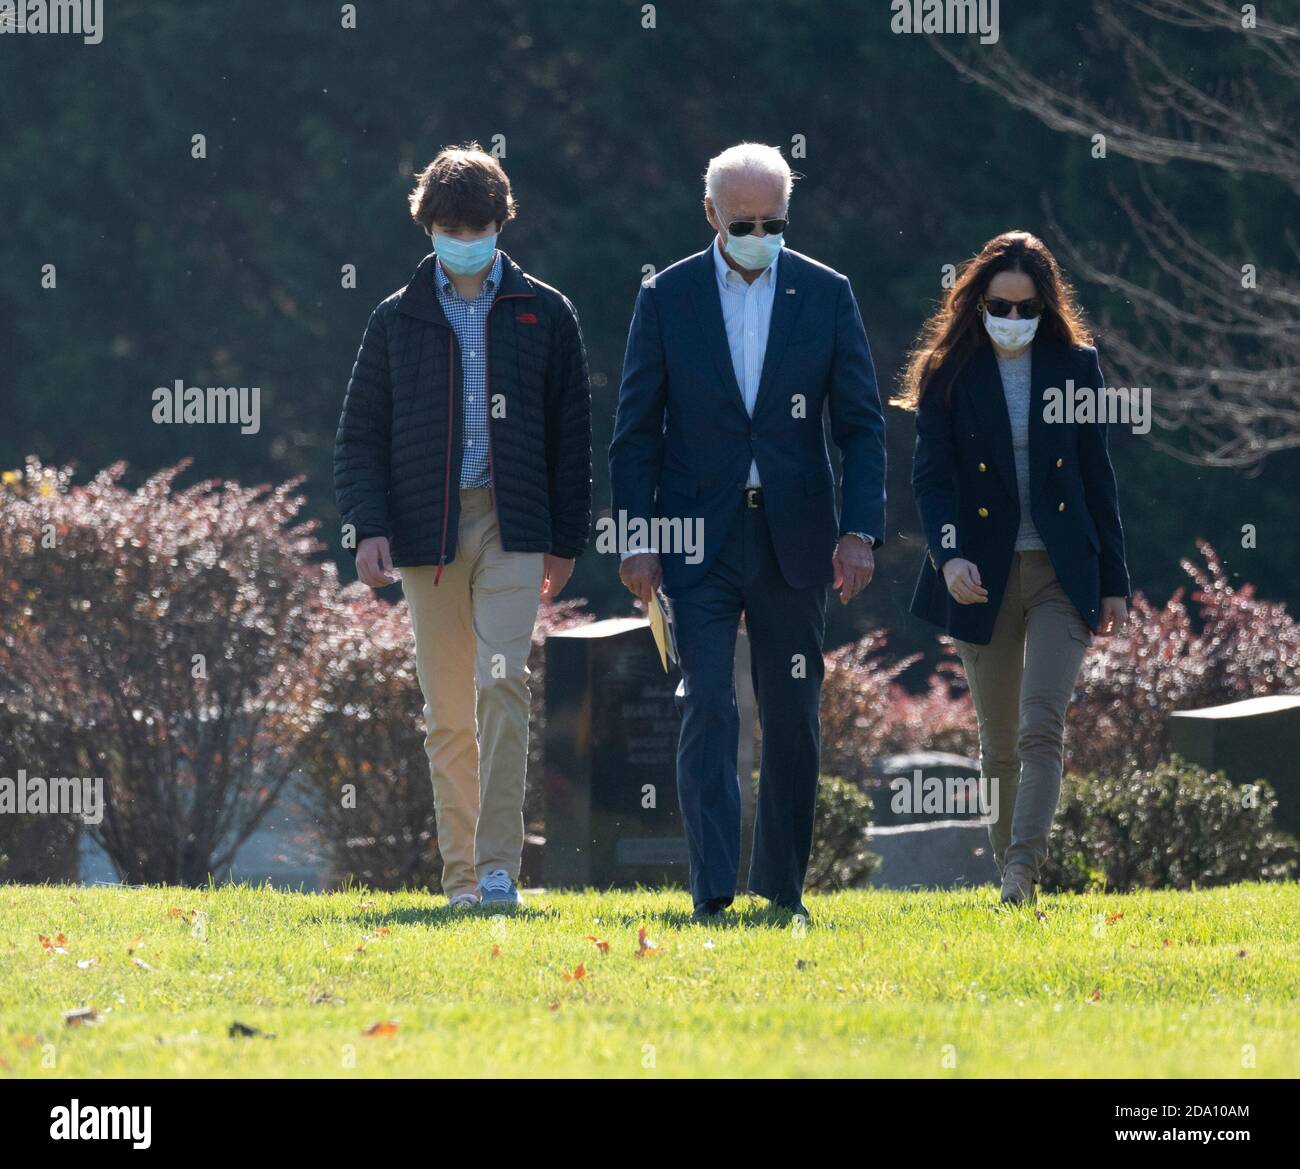 November 8, 2020: President-elect JOE BIDEN, center, walks with his grandson ROBERT 'Hunter' BIDEN II, left, and daughter-in-law HALLIE BIDEN (Right, widow of Beau Biden) to visit his late son Beau's gravesite at a church service at St. Joseph's on the Brandywine Roman Catholic cemetery in Wilmington, Delaware. Credit: Brian Branch Price/ZUMA Wire/Alamy Live News Stock Photo